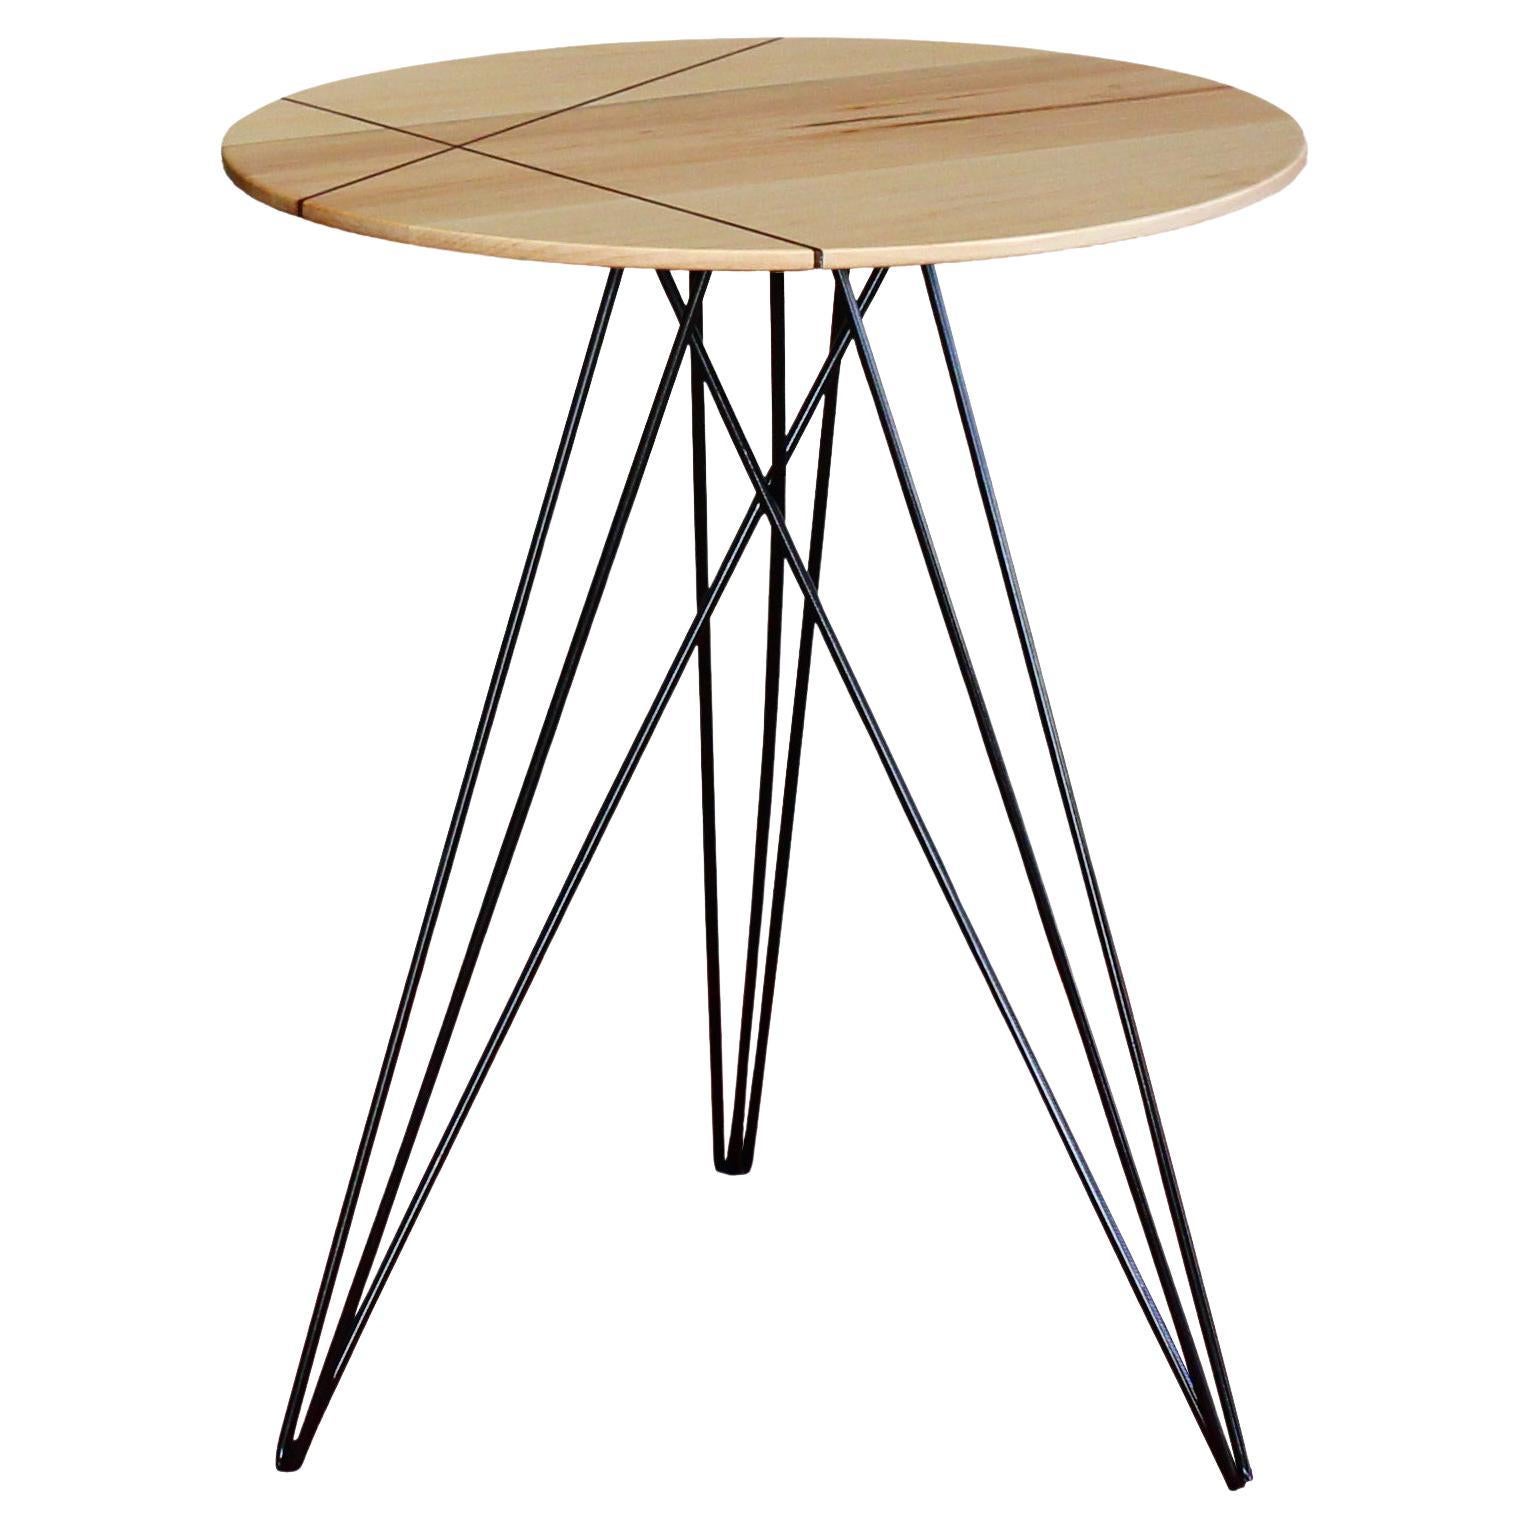 Hudson Hairpin Side Table with Wood Inlay Maple Black